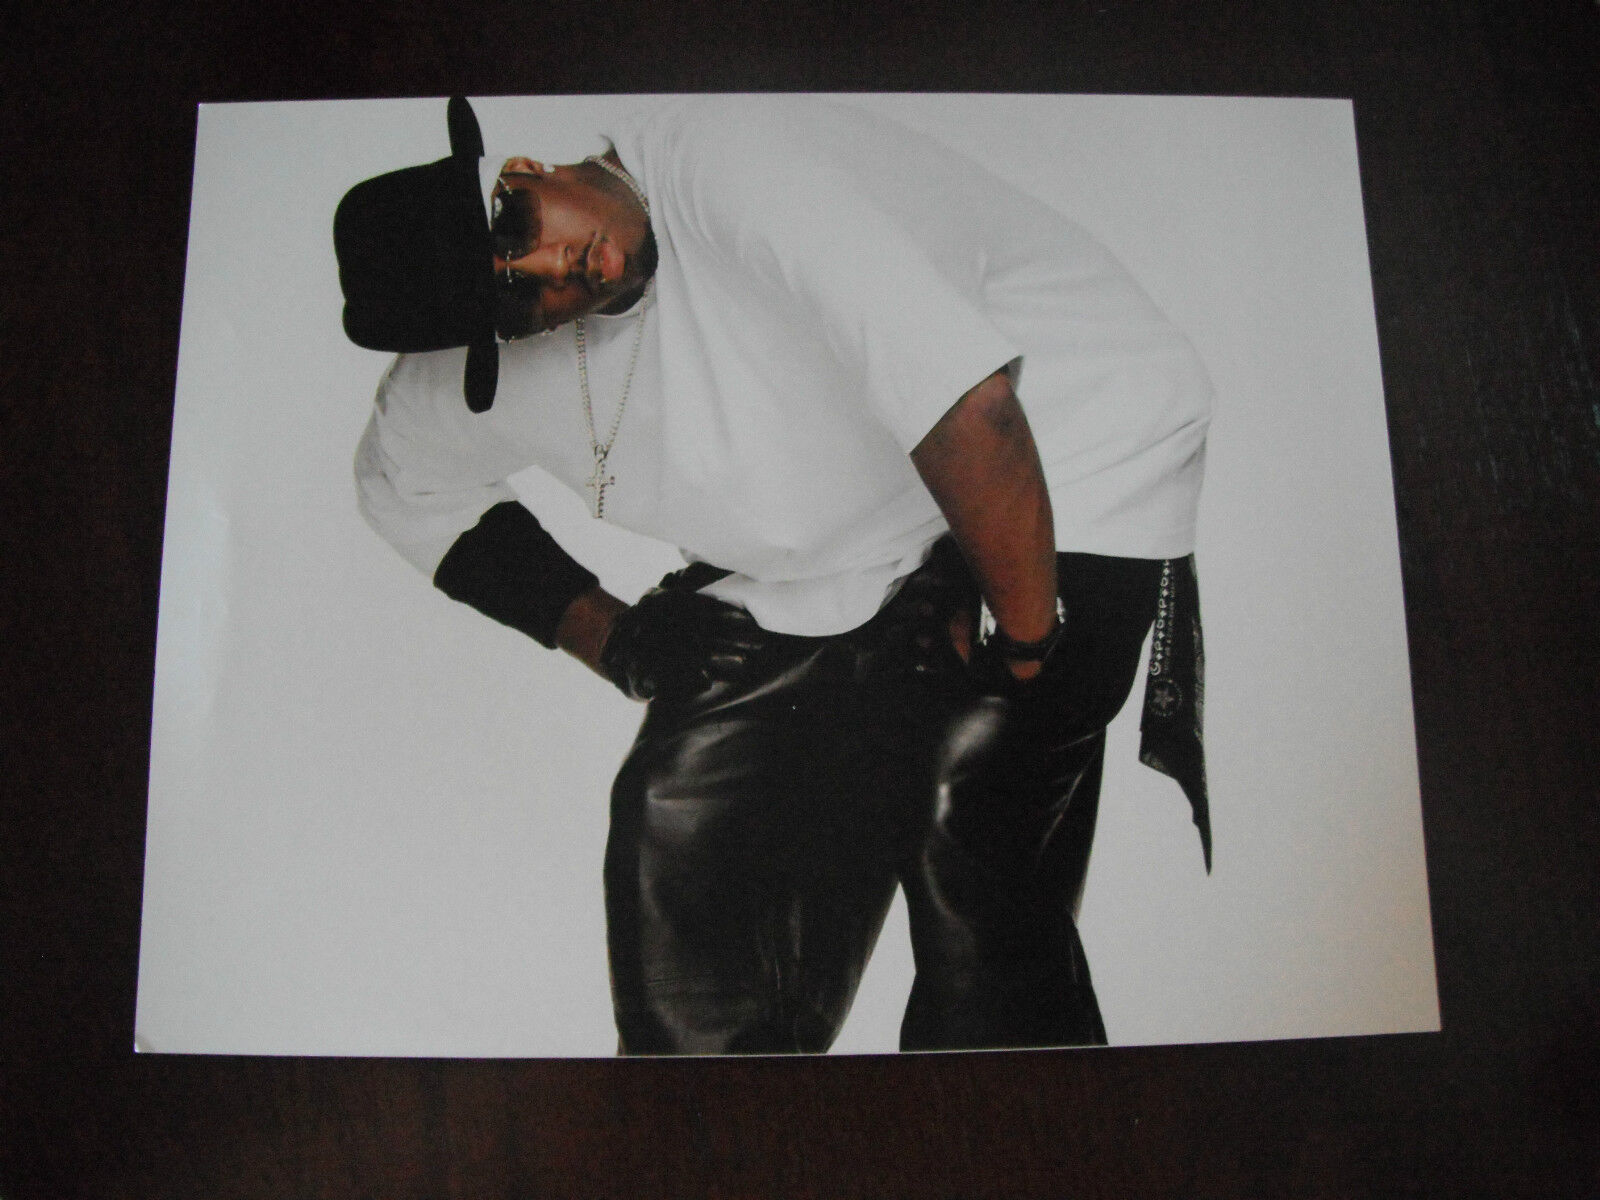 Sean Combs Puff Daddy P Diddy Puffy Diddy Rapper Actor Color 11x14 Promo Photo 